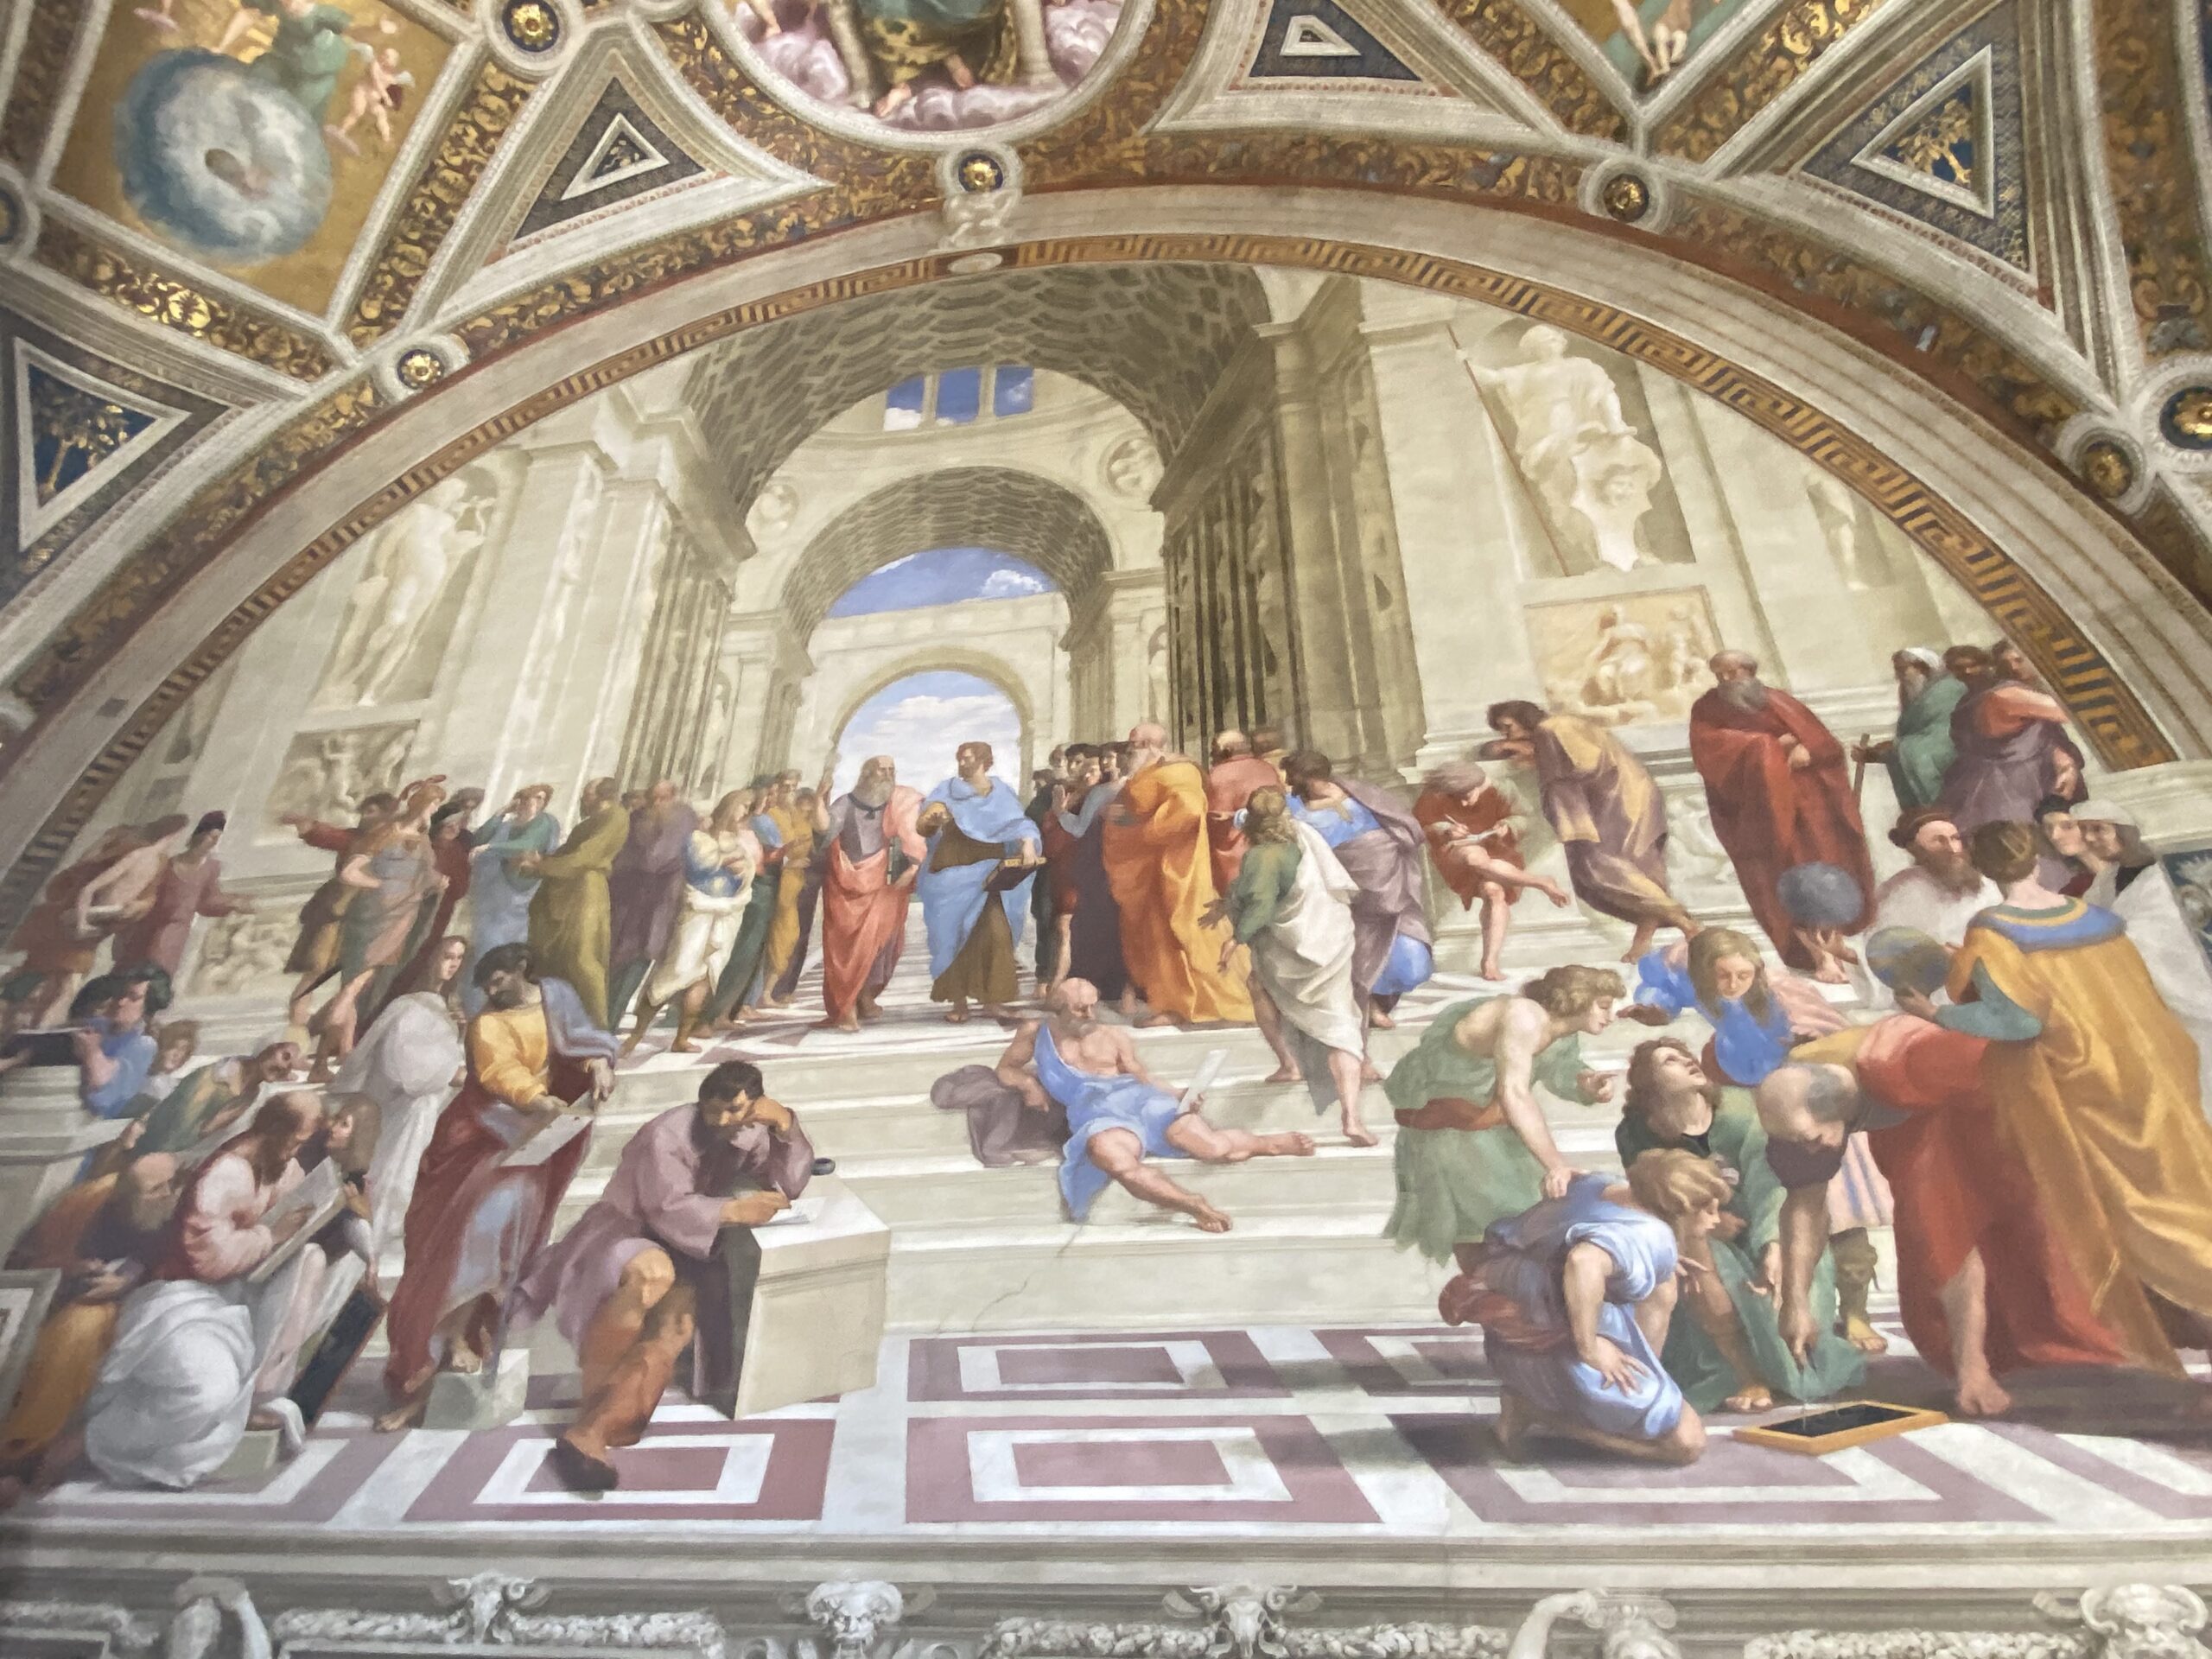 Fresco in the office of the Pope Julius II composed by the Rapheal. The image depicts all the major characters of the Western civilisation- from Socrates and Aristotle to Michelangelo and Raphael himself. Pope Julius is considered a Renaissance 'humanist', and this fresco underscored his notion of continuity of his office from the classical antiquity. 